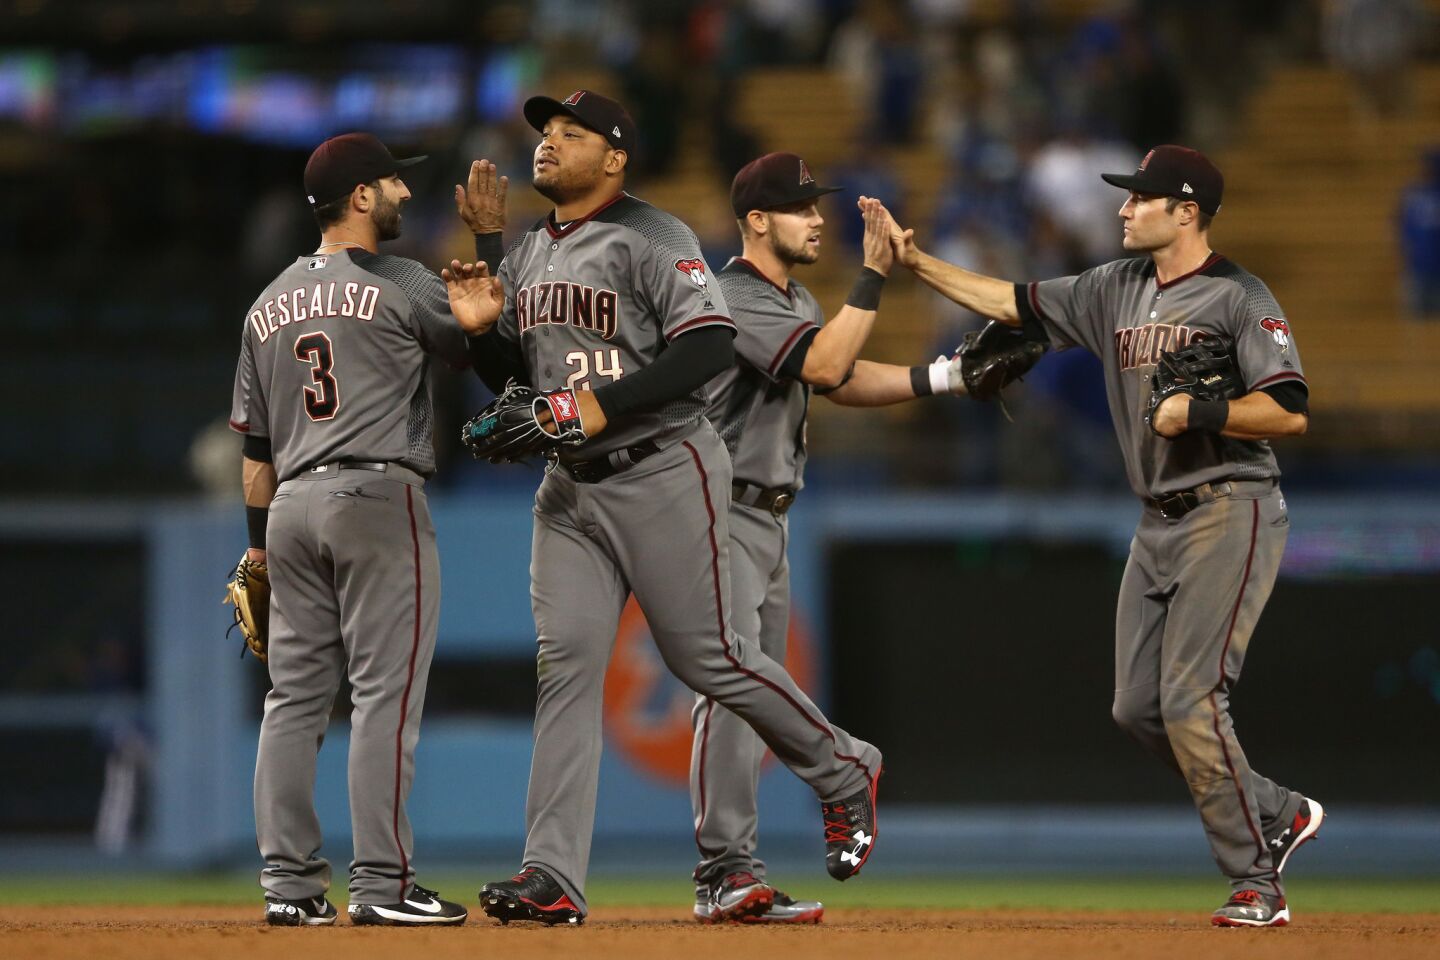 LOS ANGELES, CA - APRIL 17: Yasmany Tomas #24 ,Daniel Descalso #3, A.J. Pollock #11, and Chris Owings #16 of the Arizona Diamondbacks celebrate defeating the Los Angeles Dodgers 4-2 in a game at Dodger Stadium on April 17, 2017 in Los Angeles, California. (Photo by Sean M. Haffey/Getty Images) ** OUTS - ELSENT, FPG, CM - OUTS * NM, PH, VA if sourced by CT, LA or MoD **